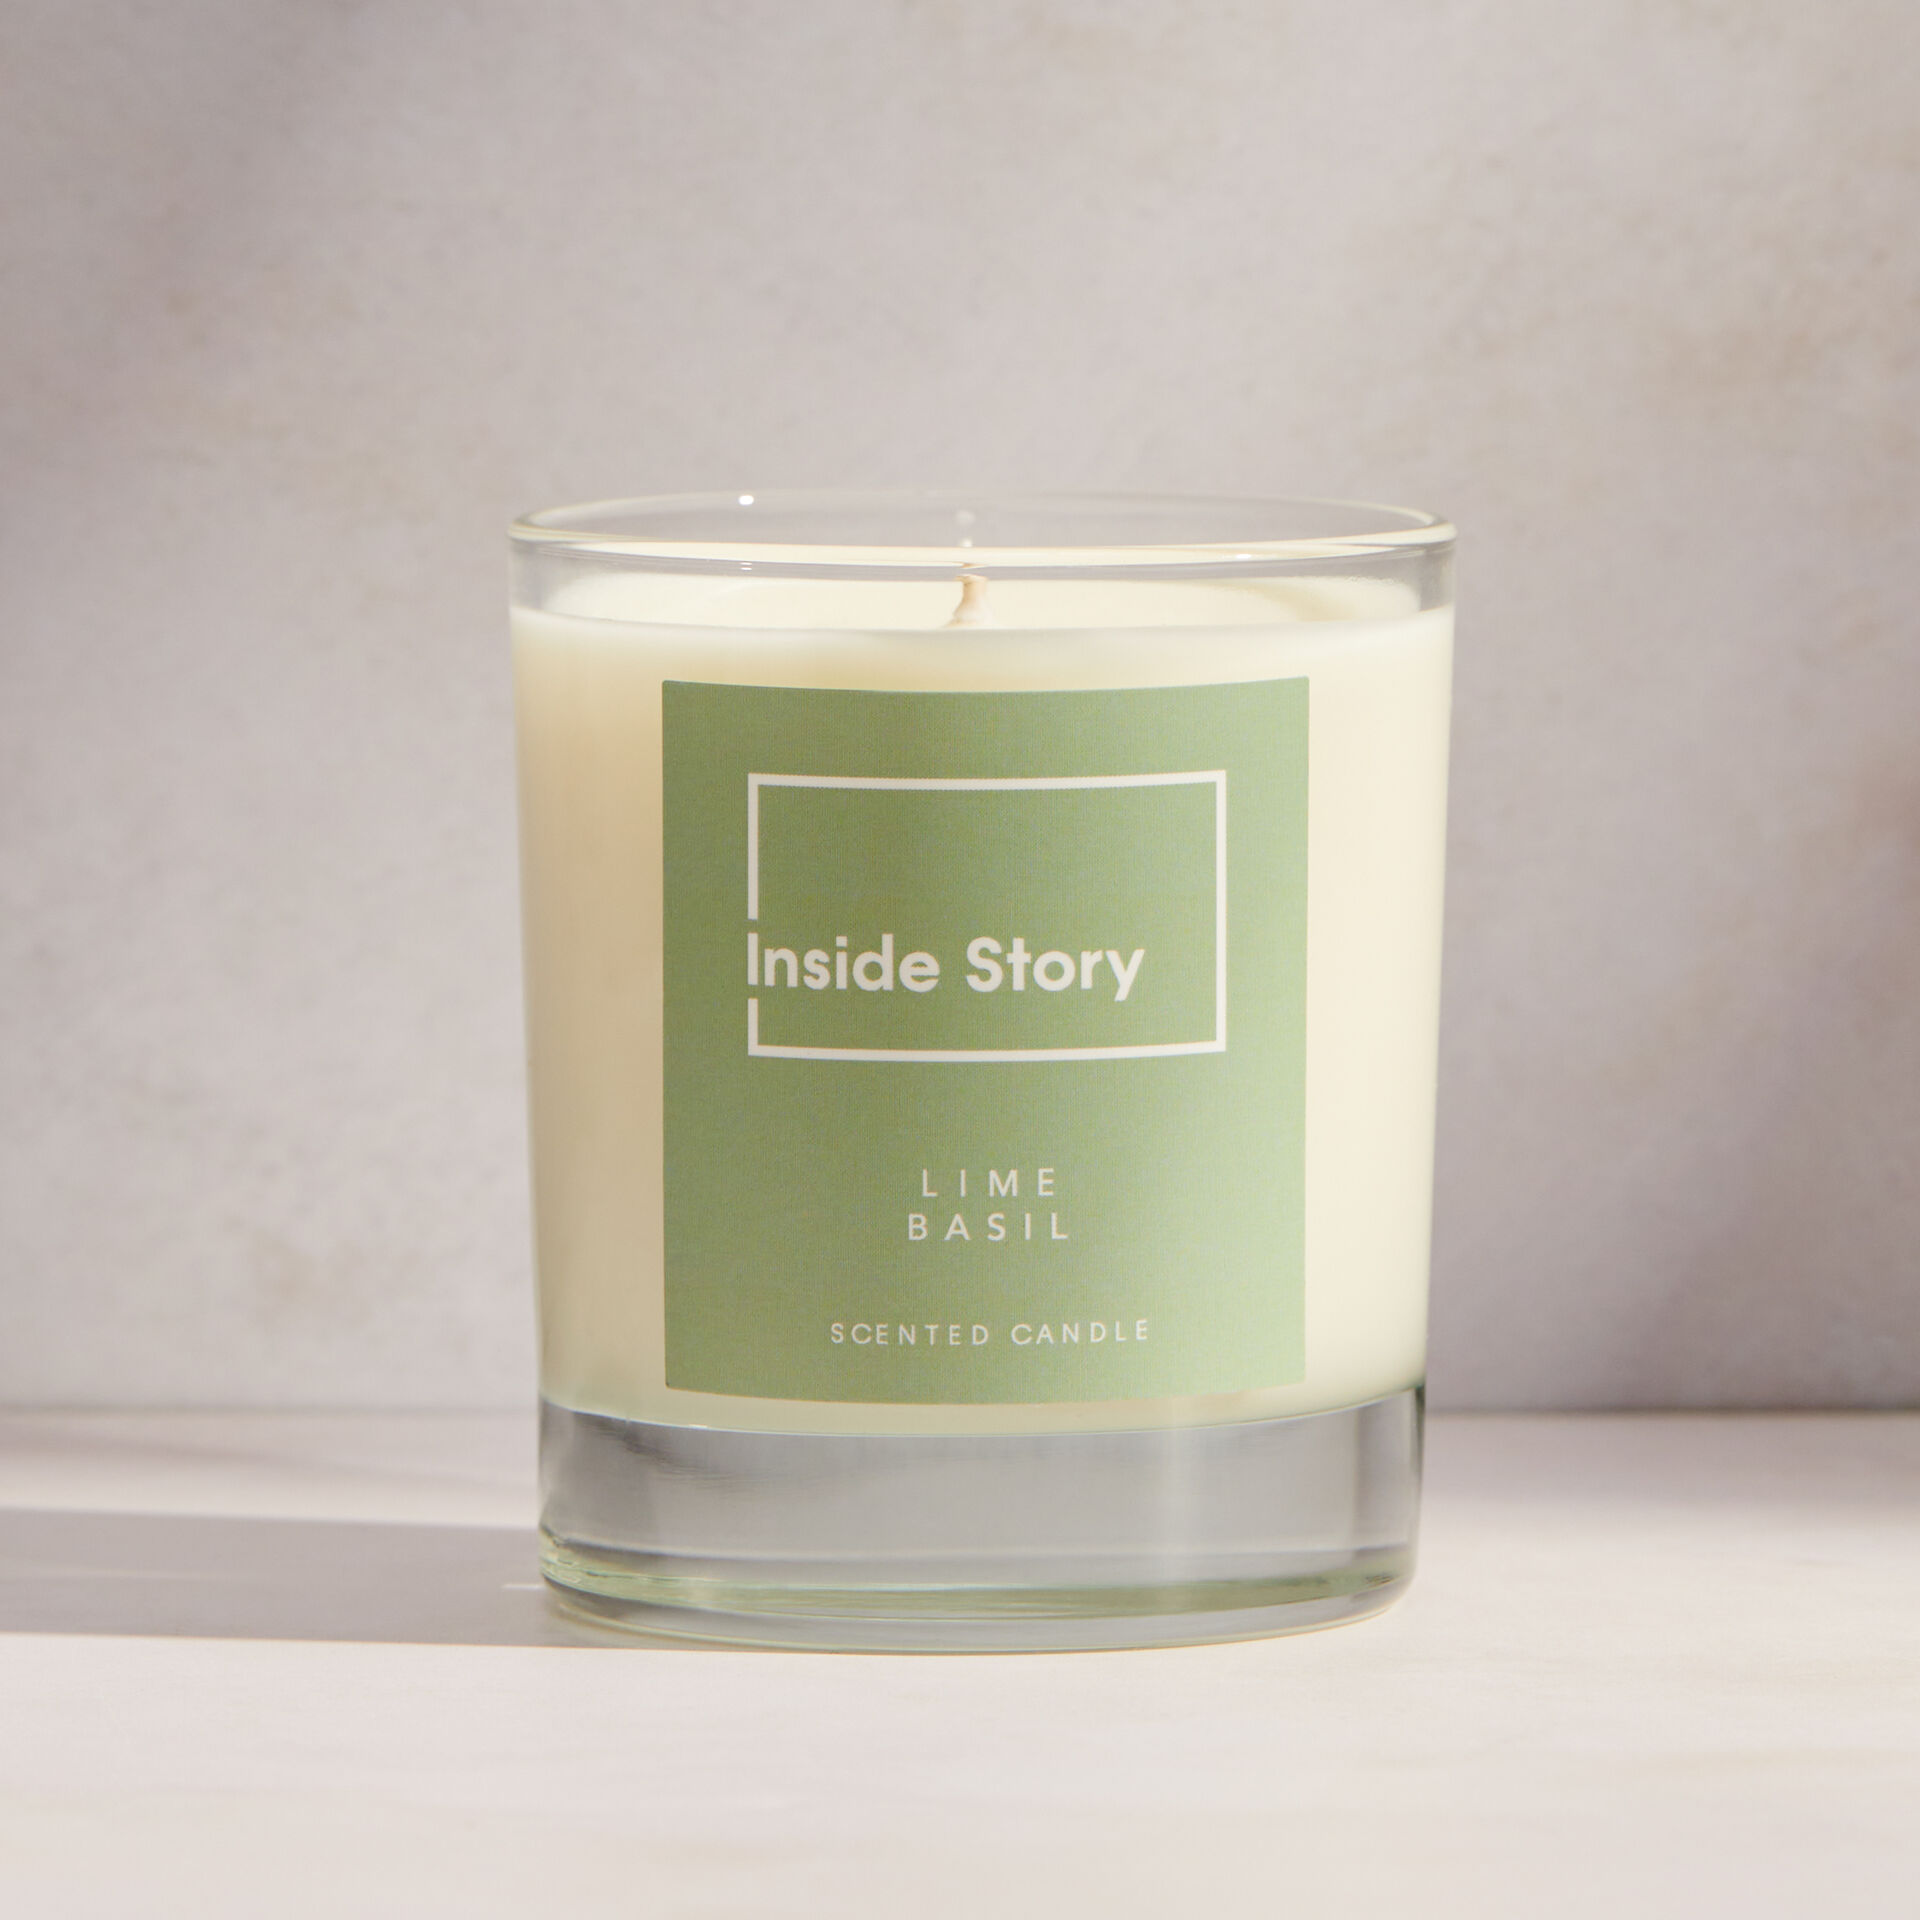 ${product-id}-Lime Basil Scented Signature Candle-Neutral-${view-type}